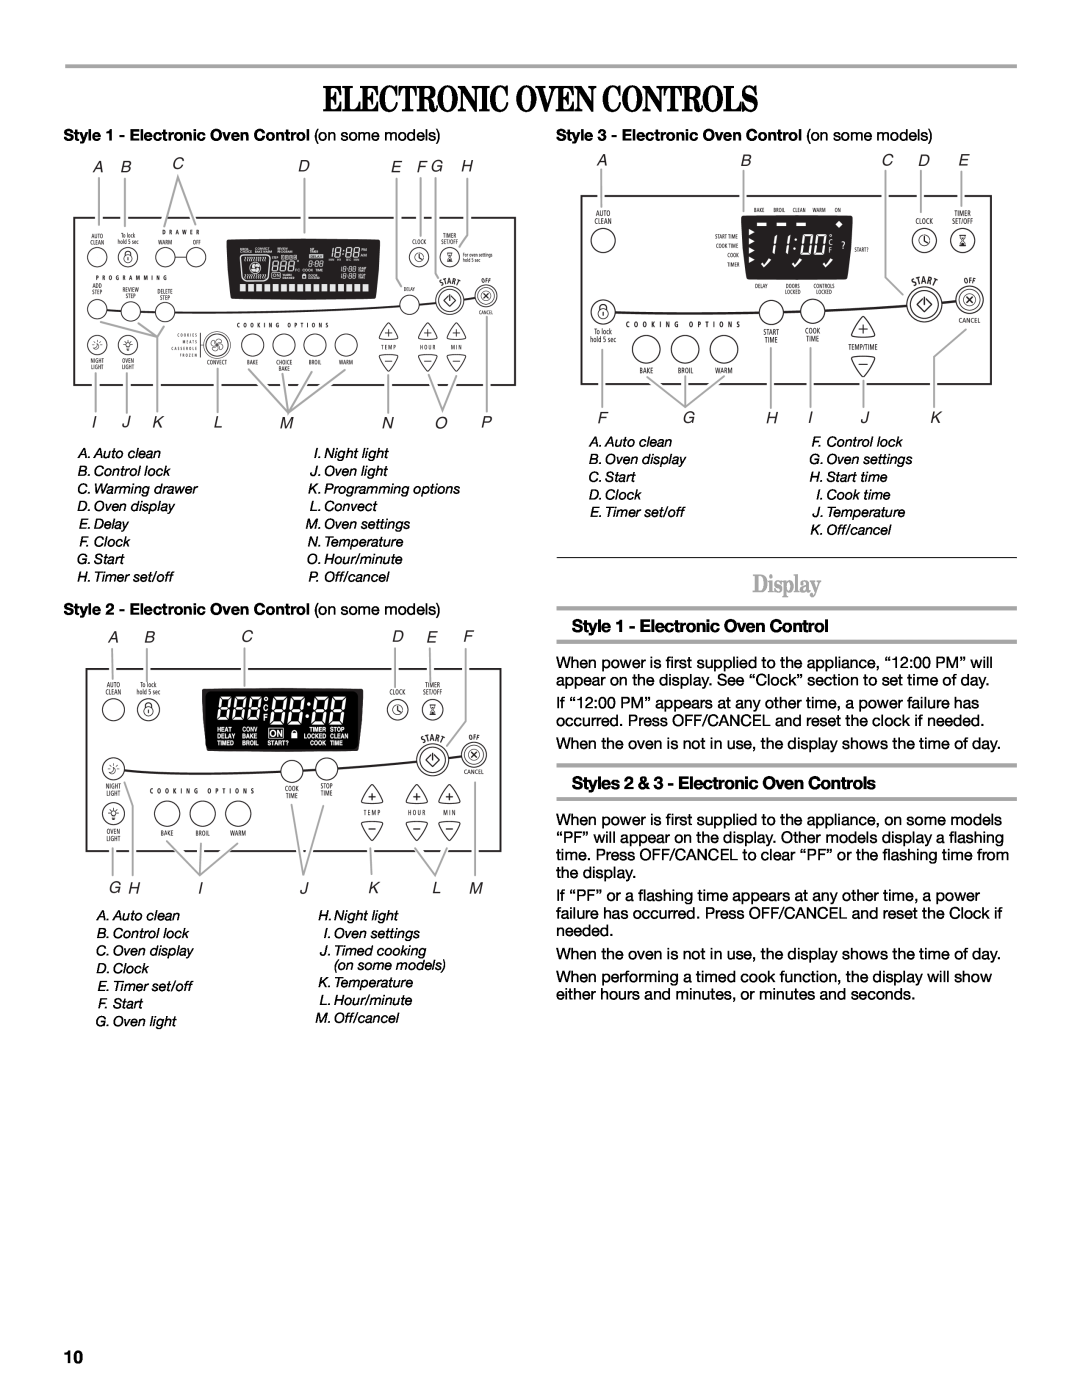 Whirlpool GERC4110PB2 manual Electronic Oven Controls, Display, Style 1 - Electronic Oven Control, A B Cde F G H, A Bcd E F 